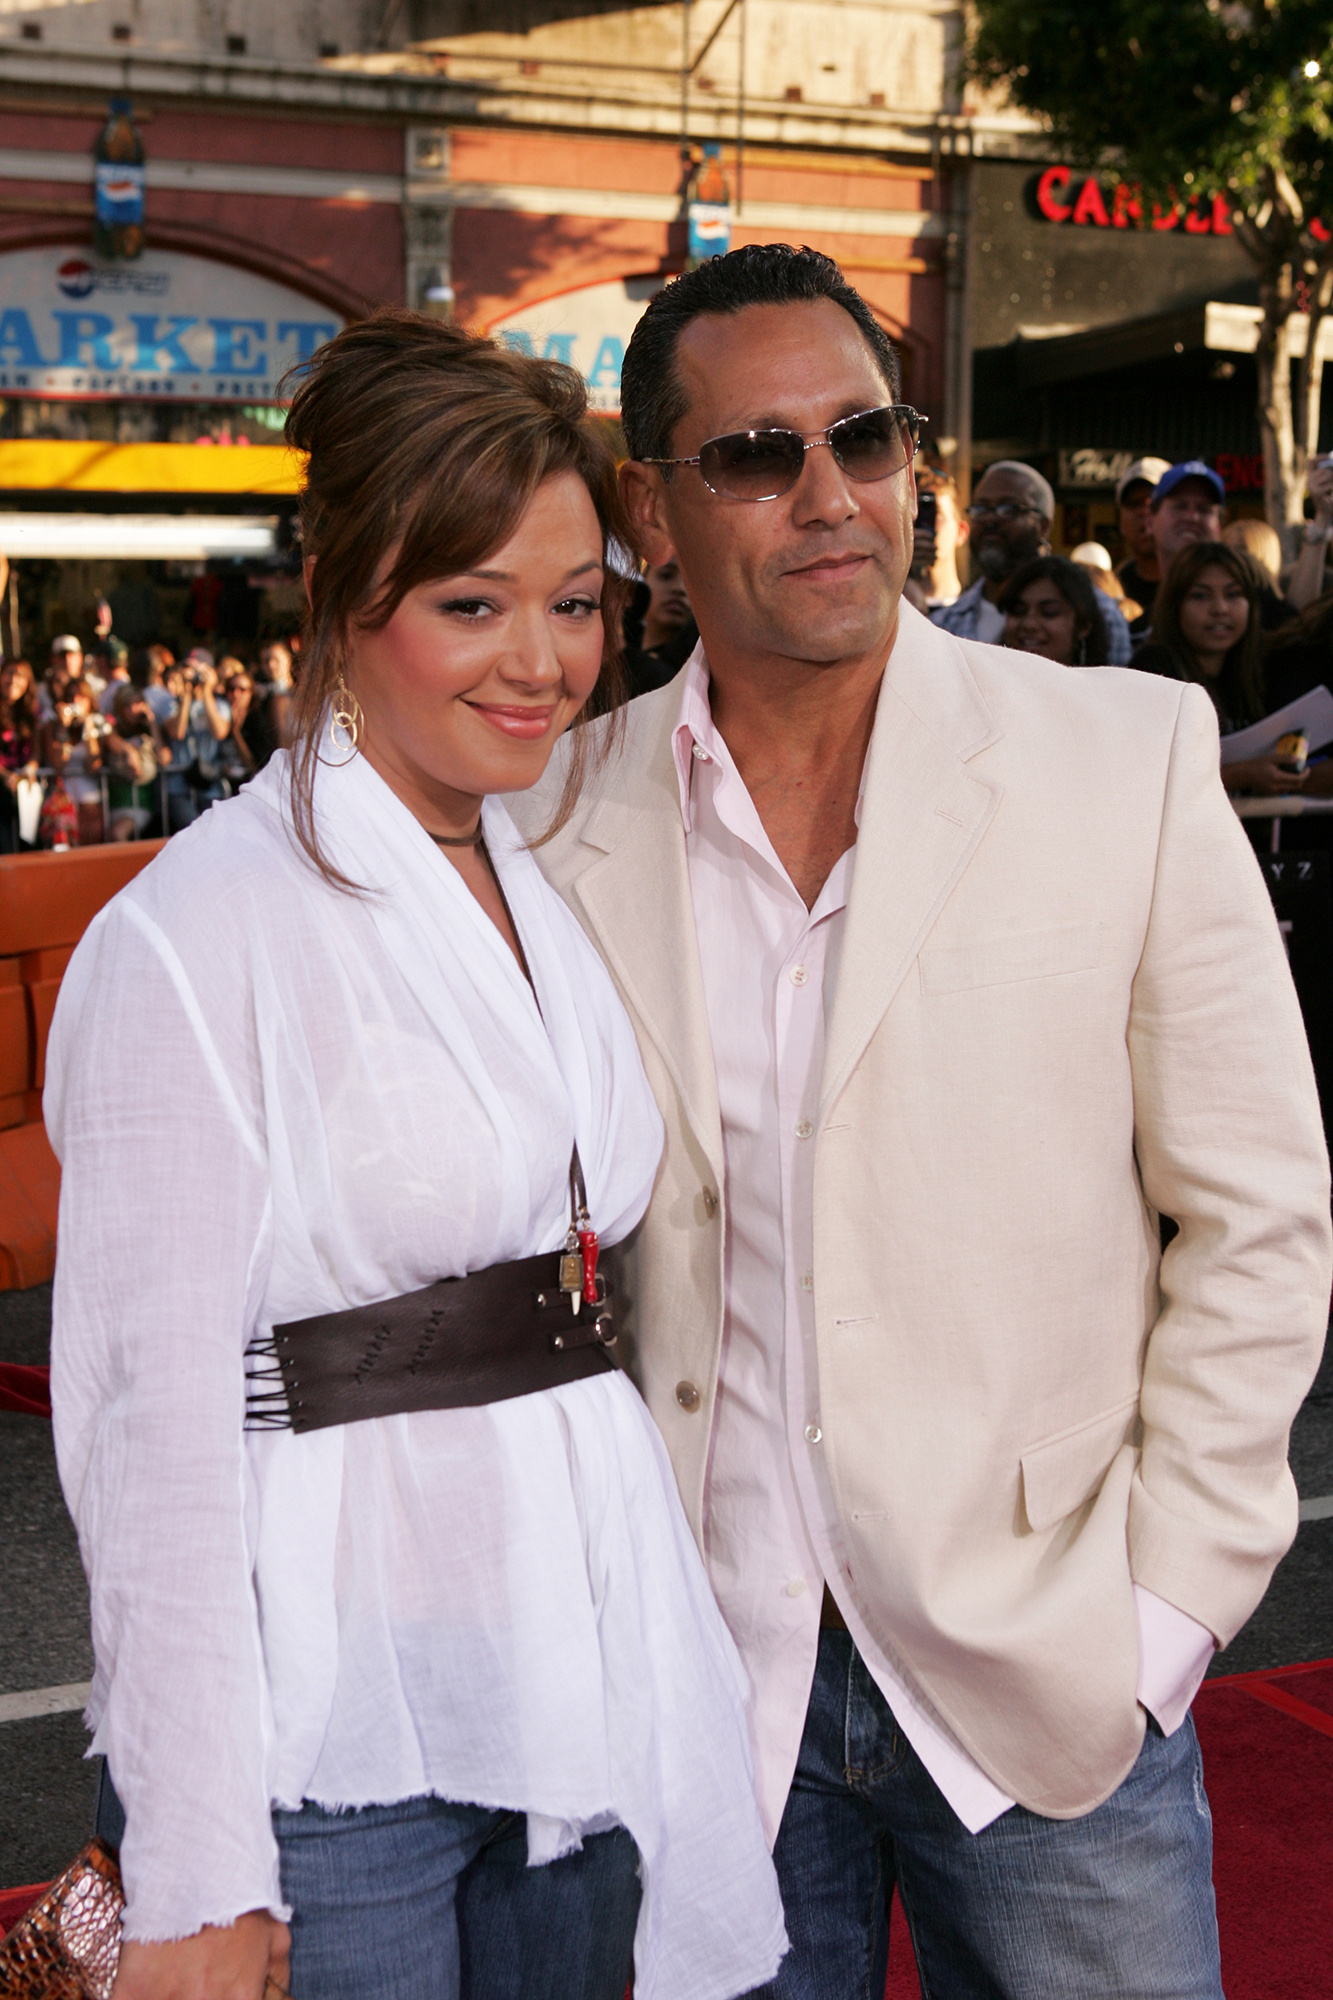 Leah Remini and Husband Angelo Pagan’s Relationship Timeline